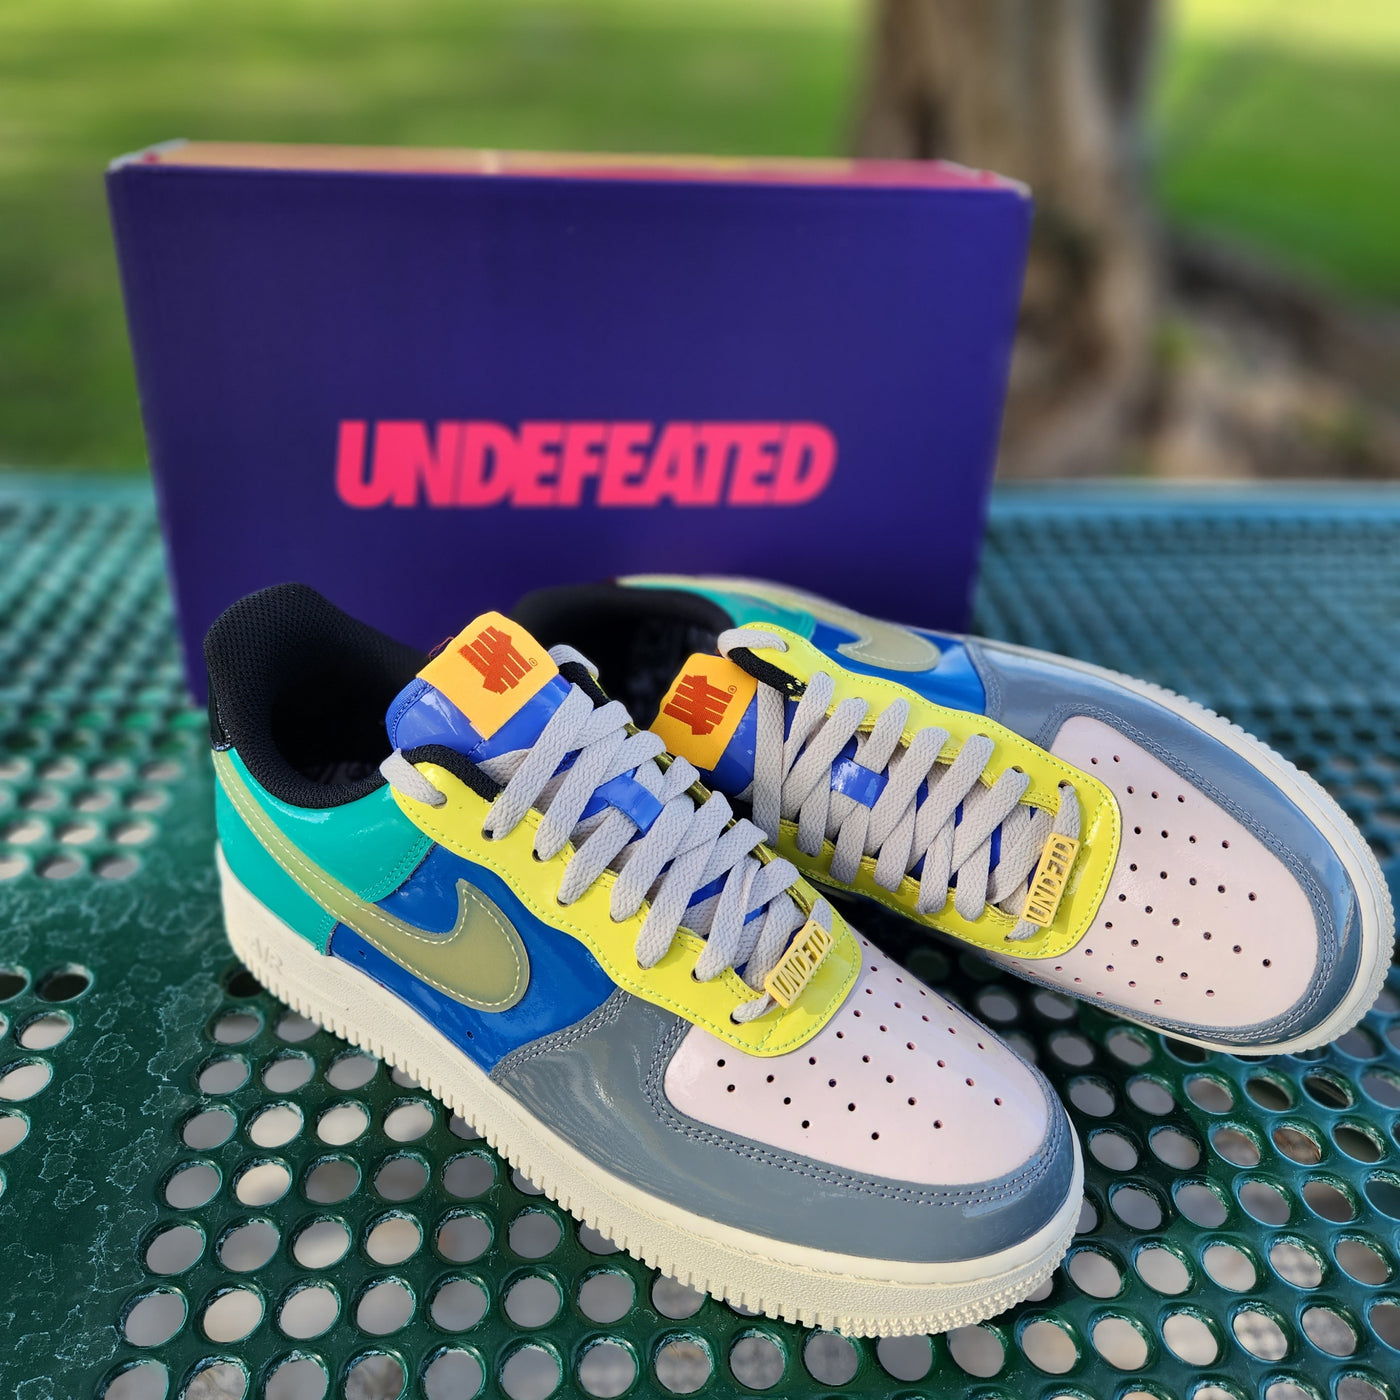 UNDEFEATED X NIKE AIR FORCE 1 LOW SP - SMOKEGREY/ GOLD/ MULTI – Undefeated